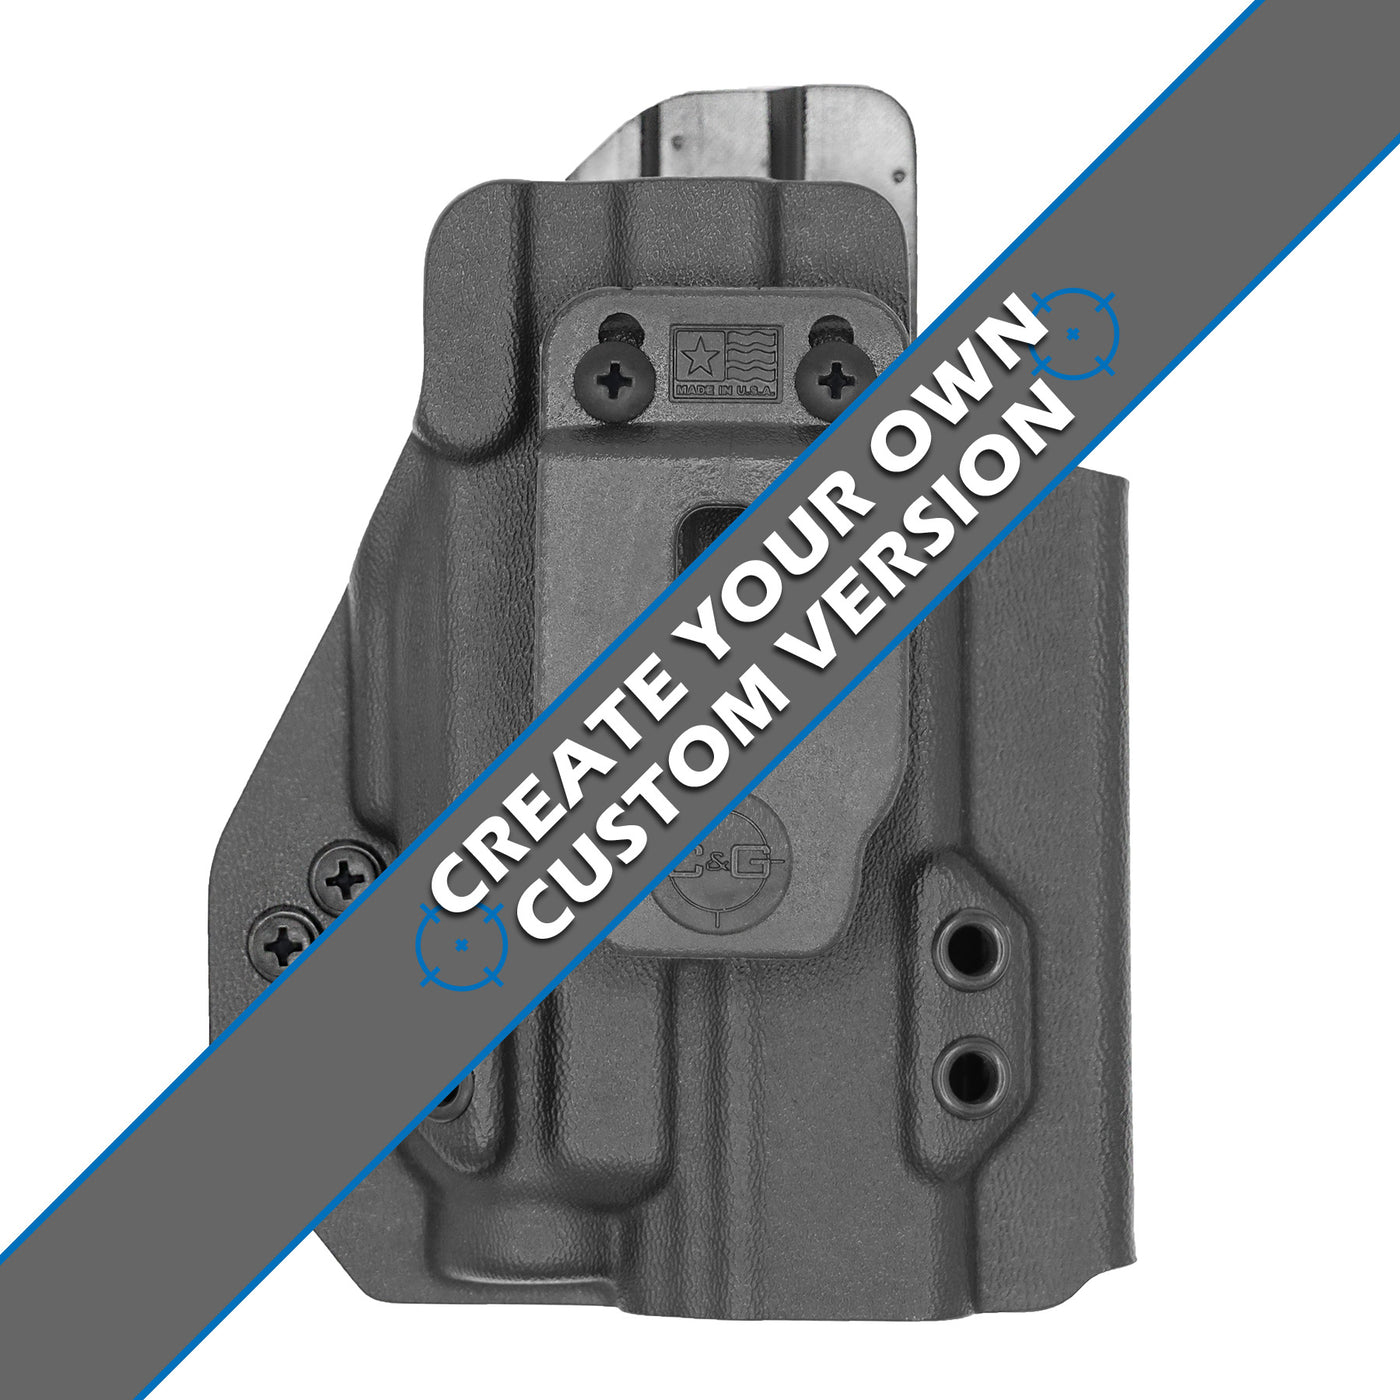 C&G Holsters custom IWB Tactical CZ P10/c streamlight tlr7/a